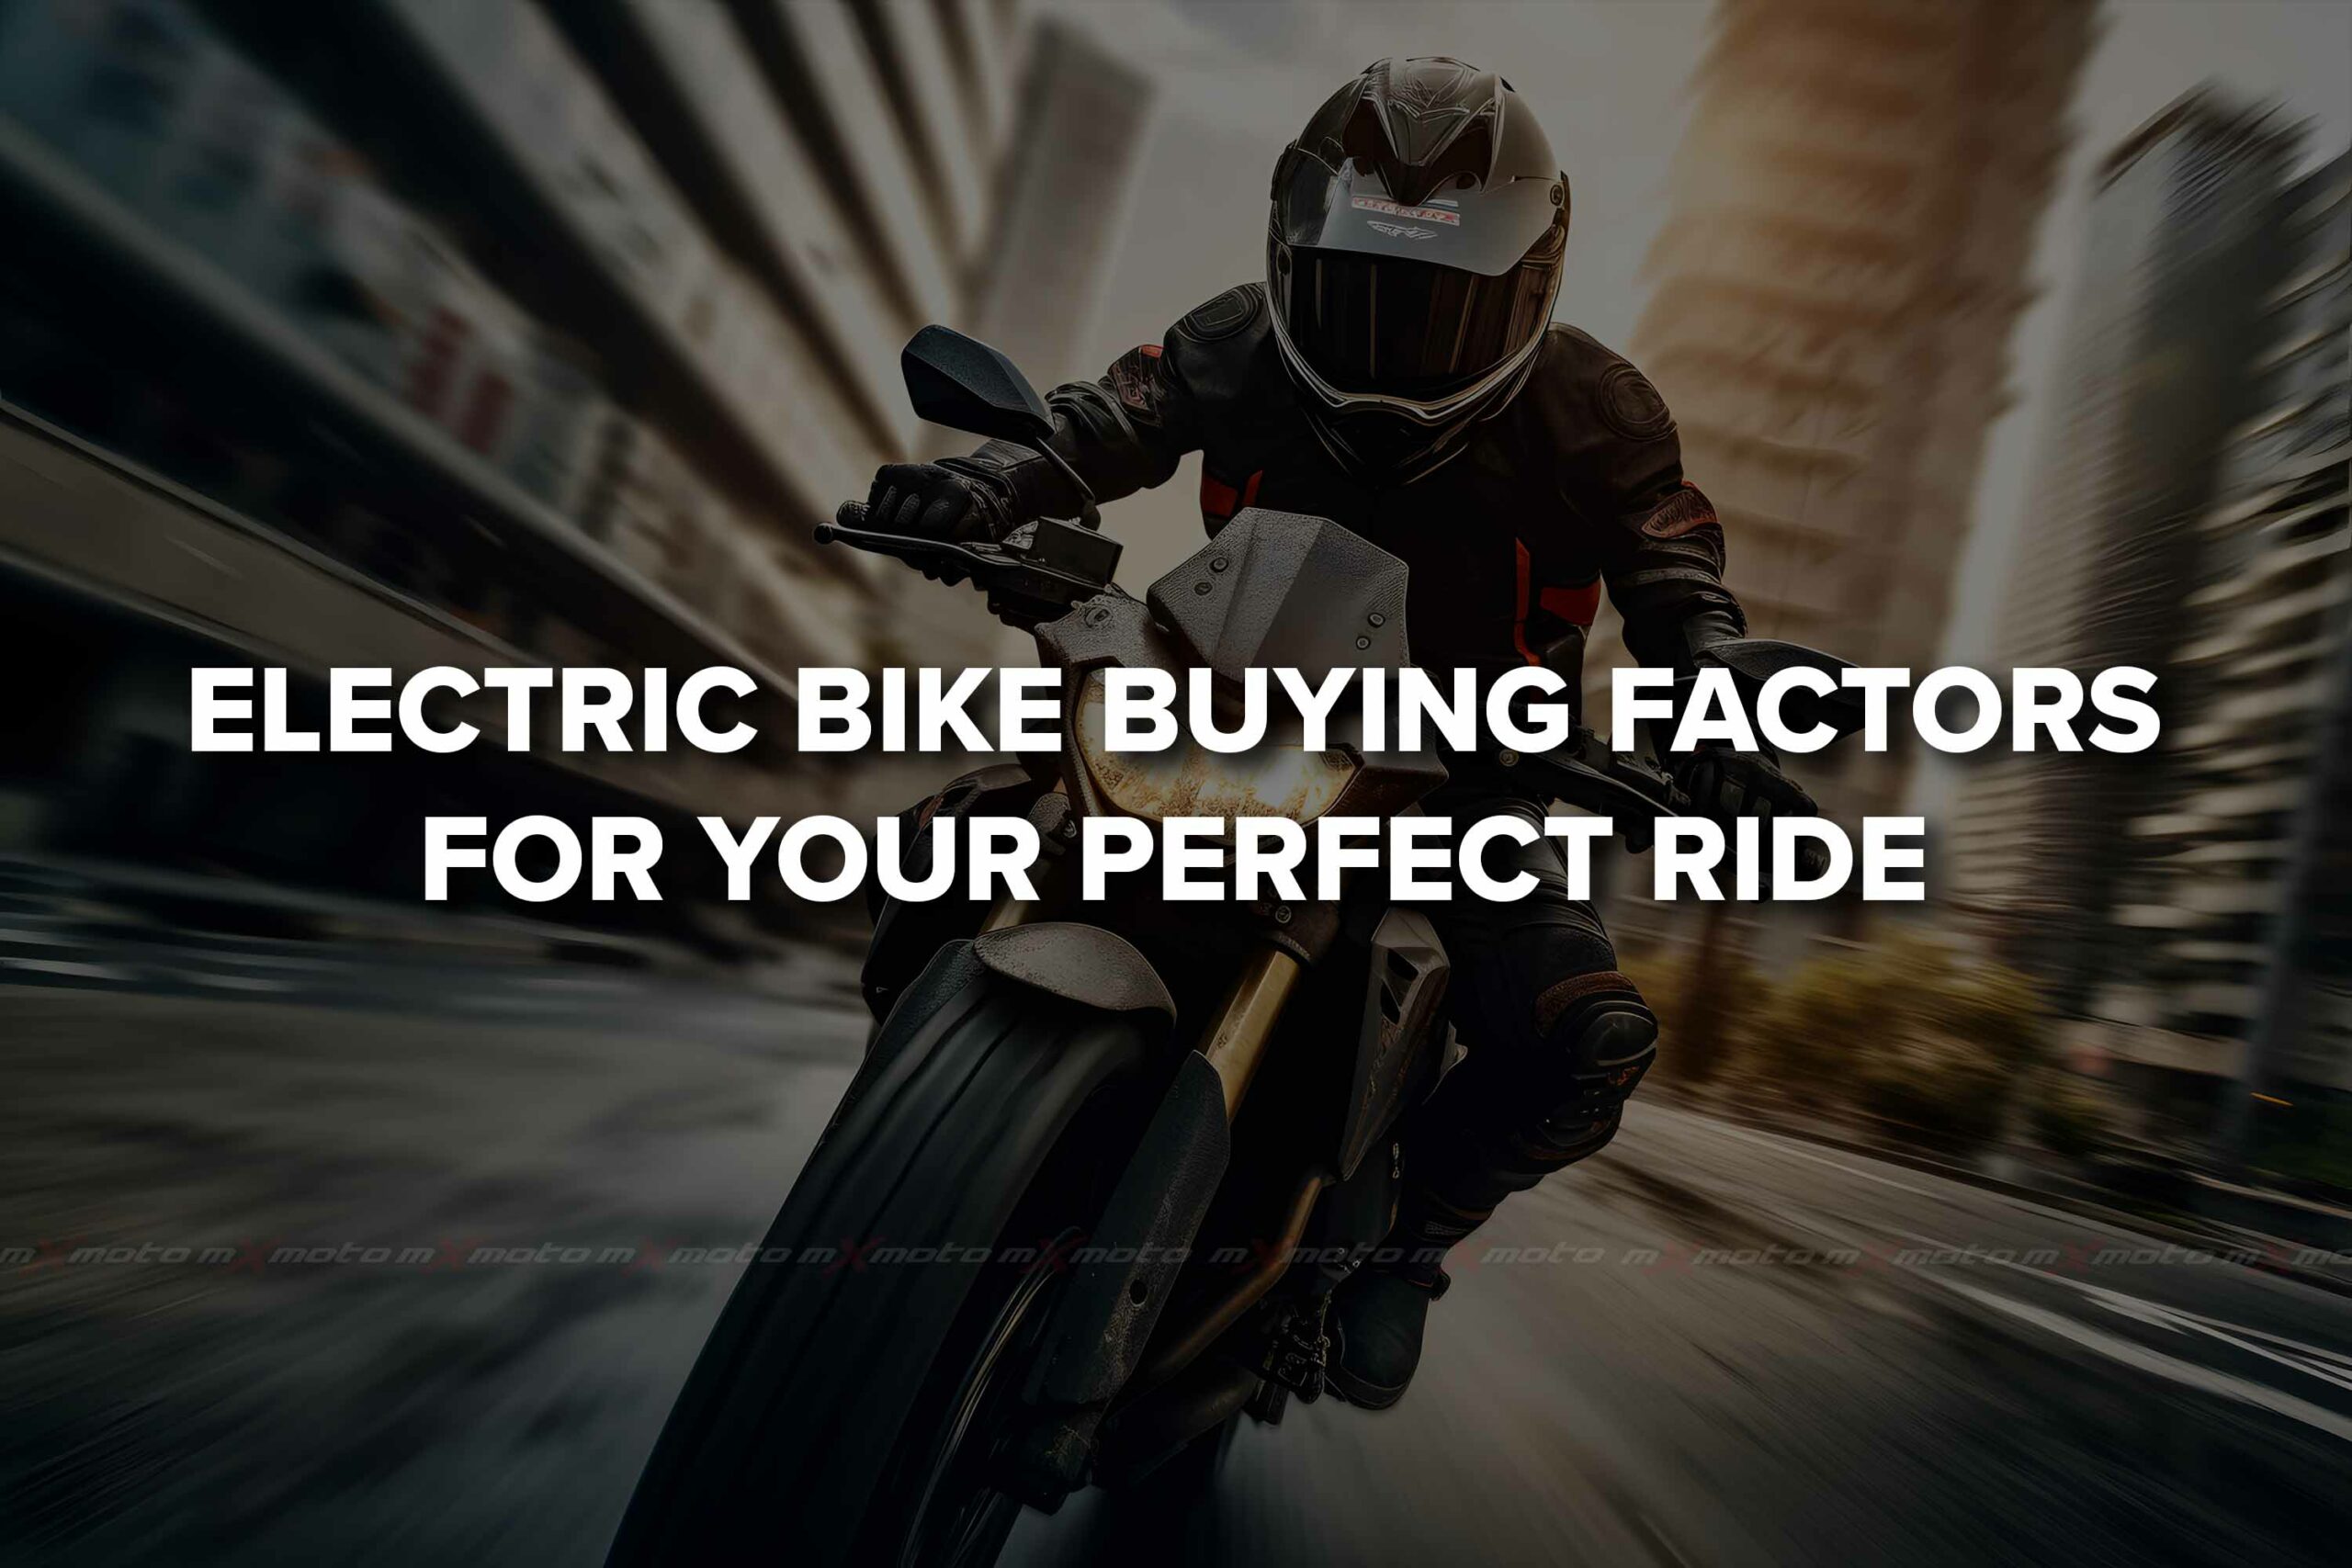 The Key Electric Bike Buying Factors for Your Perfect Ride